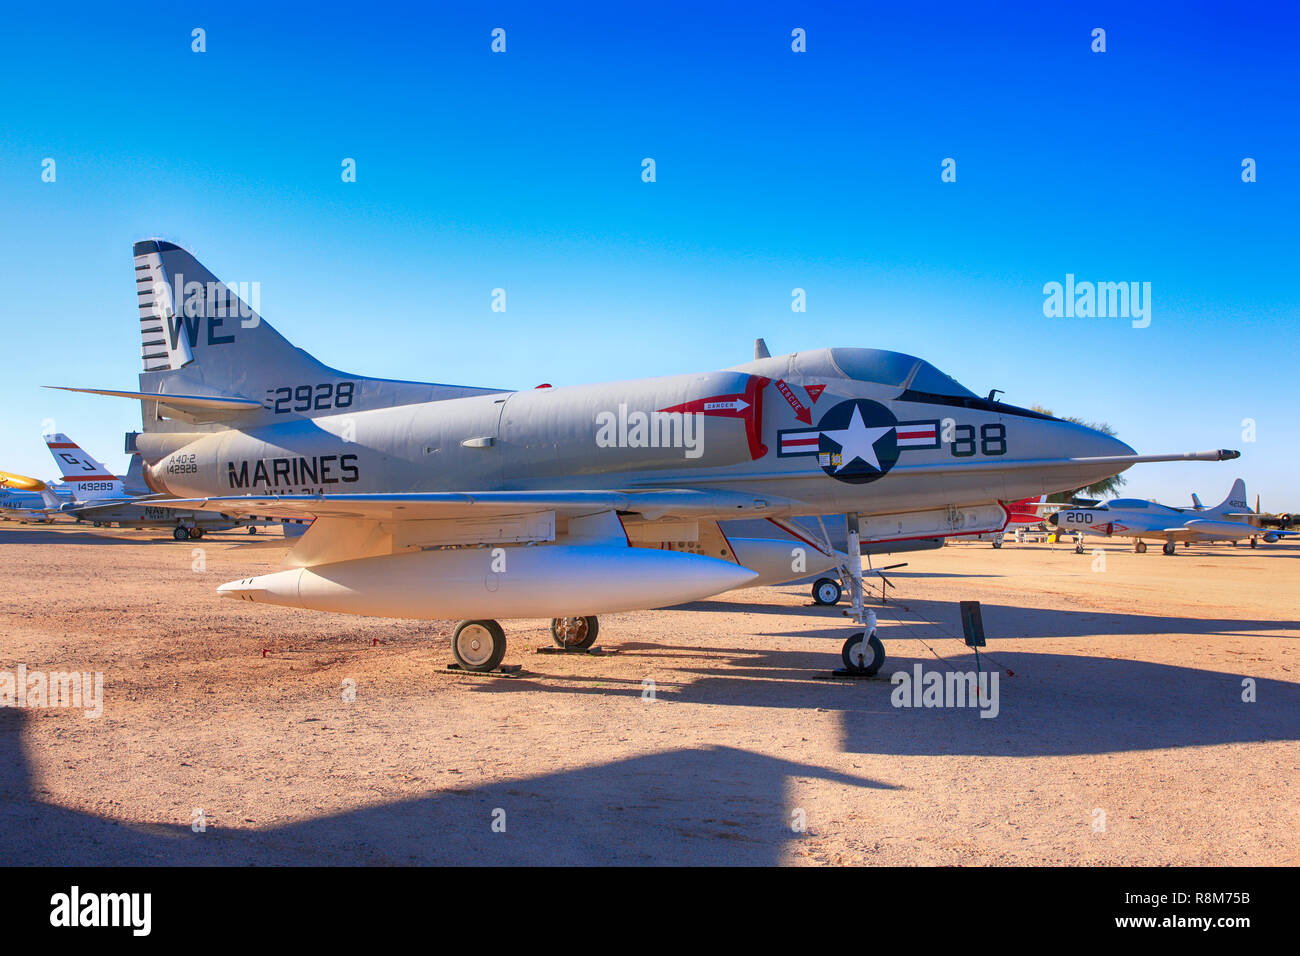 USMC Douglas A4D Skyhawk attack bomber plane on display at the Pima Air & Space Museum in Tucson, AZ Stock Photo